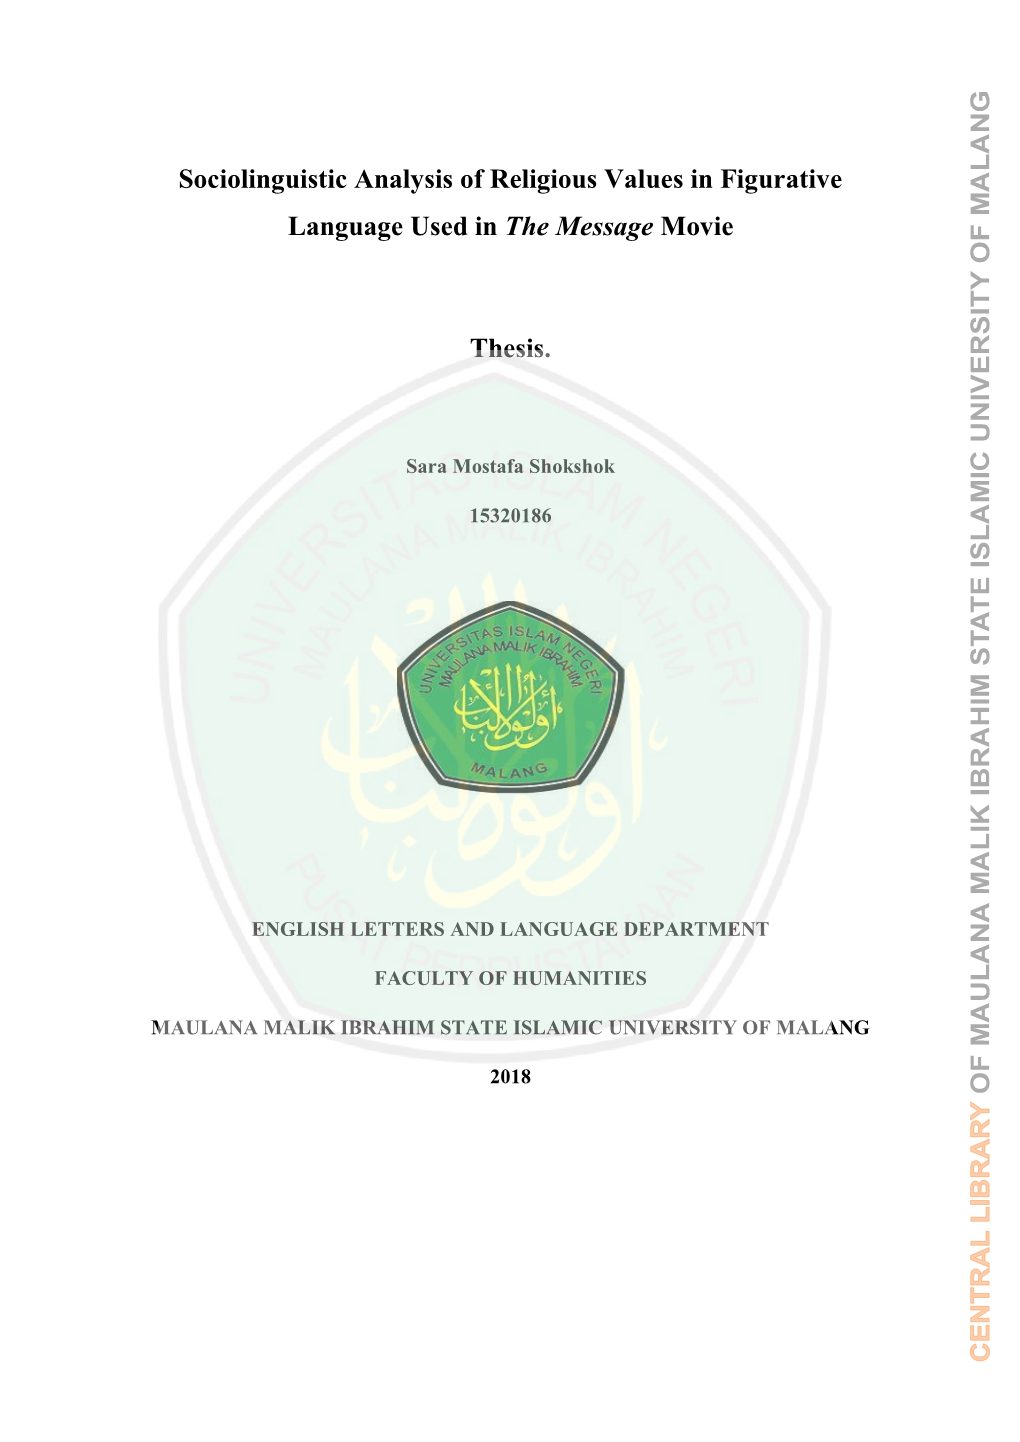 Sociolinguistic Analysis of Religious Values in Figurative Language Used in the Message Movie